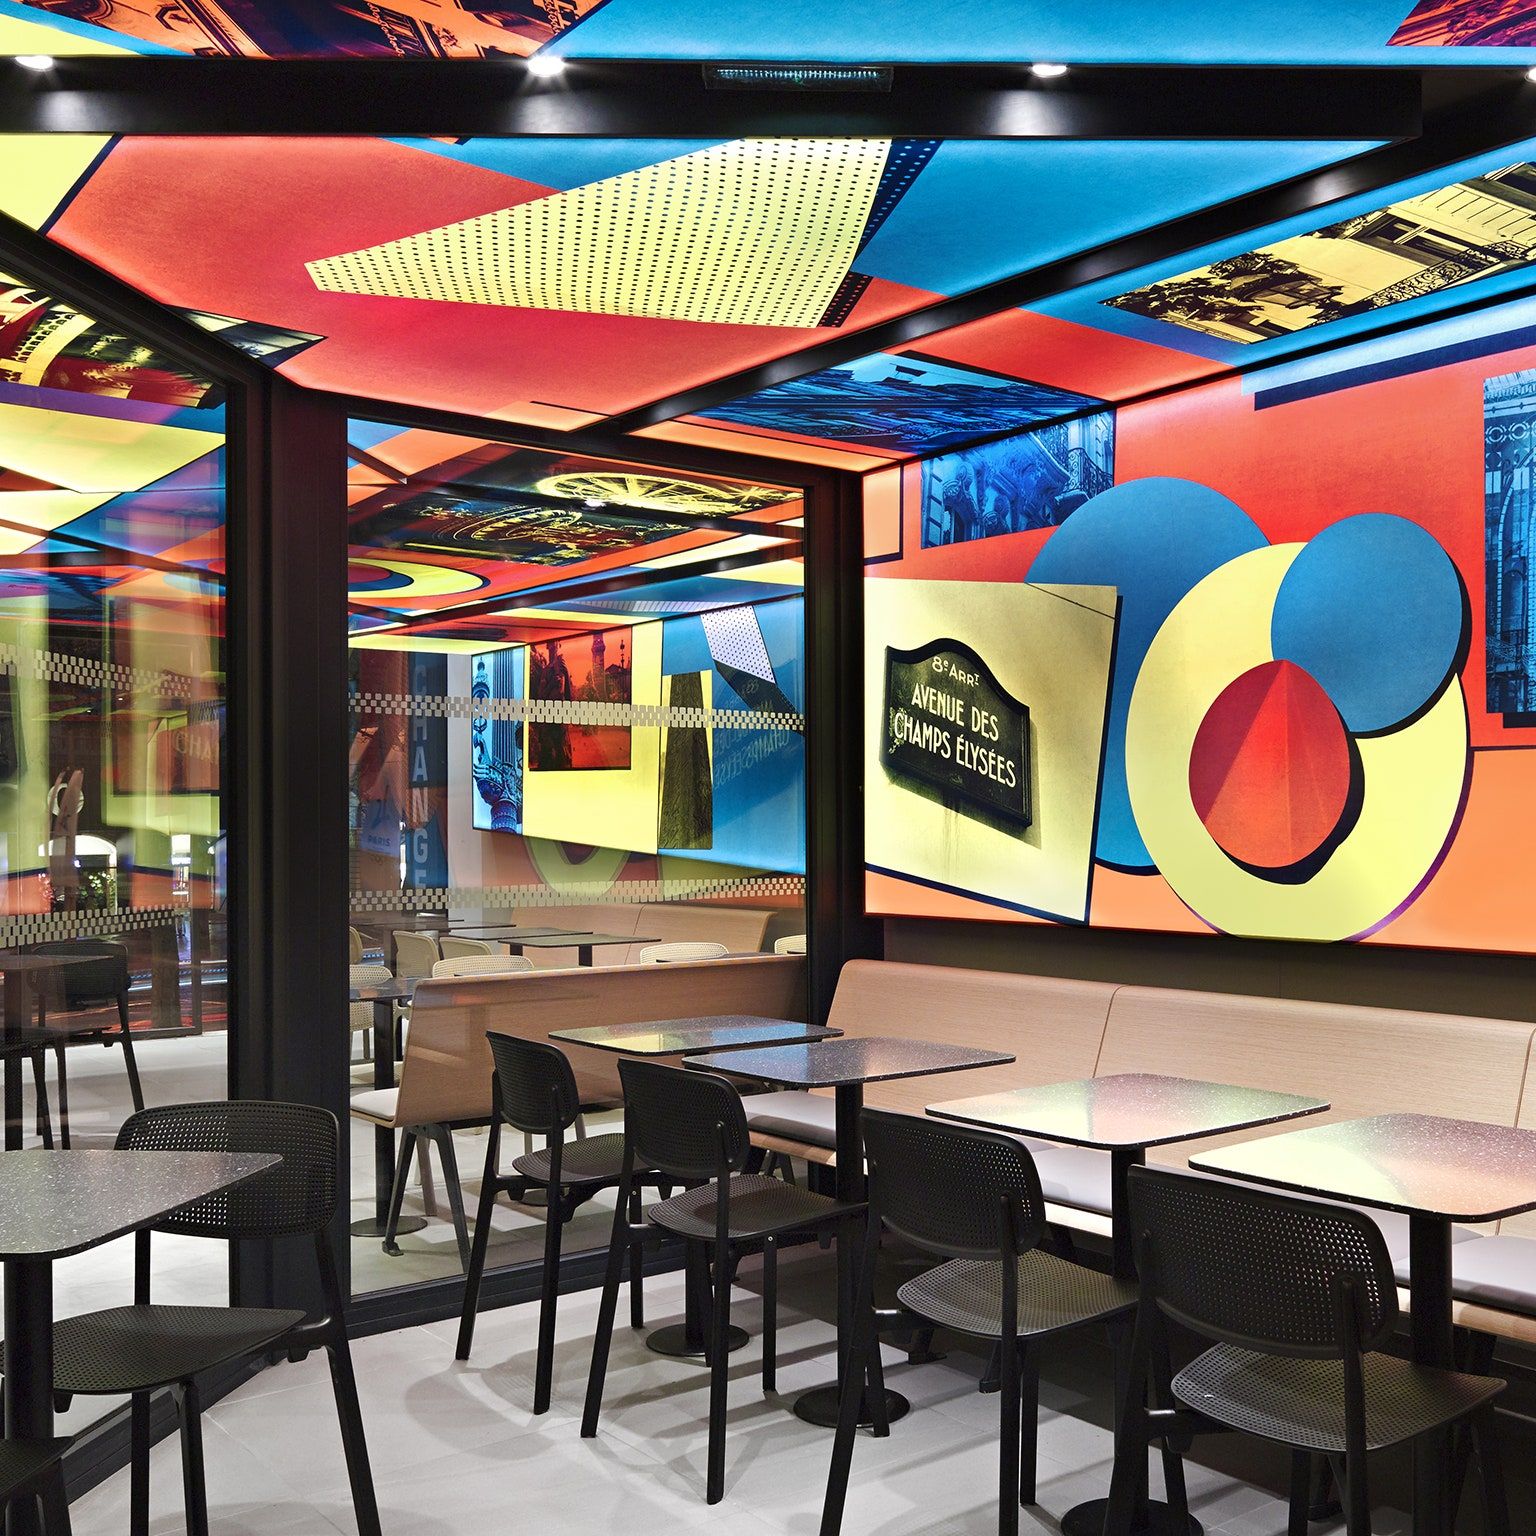 The World's Most Popular McDonalds Is Now Also the Most Stylish. Condé Nast Traveler